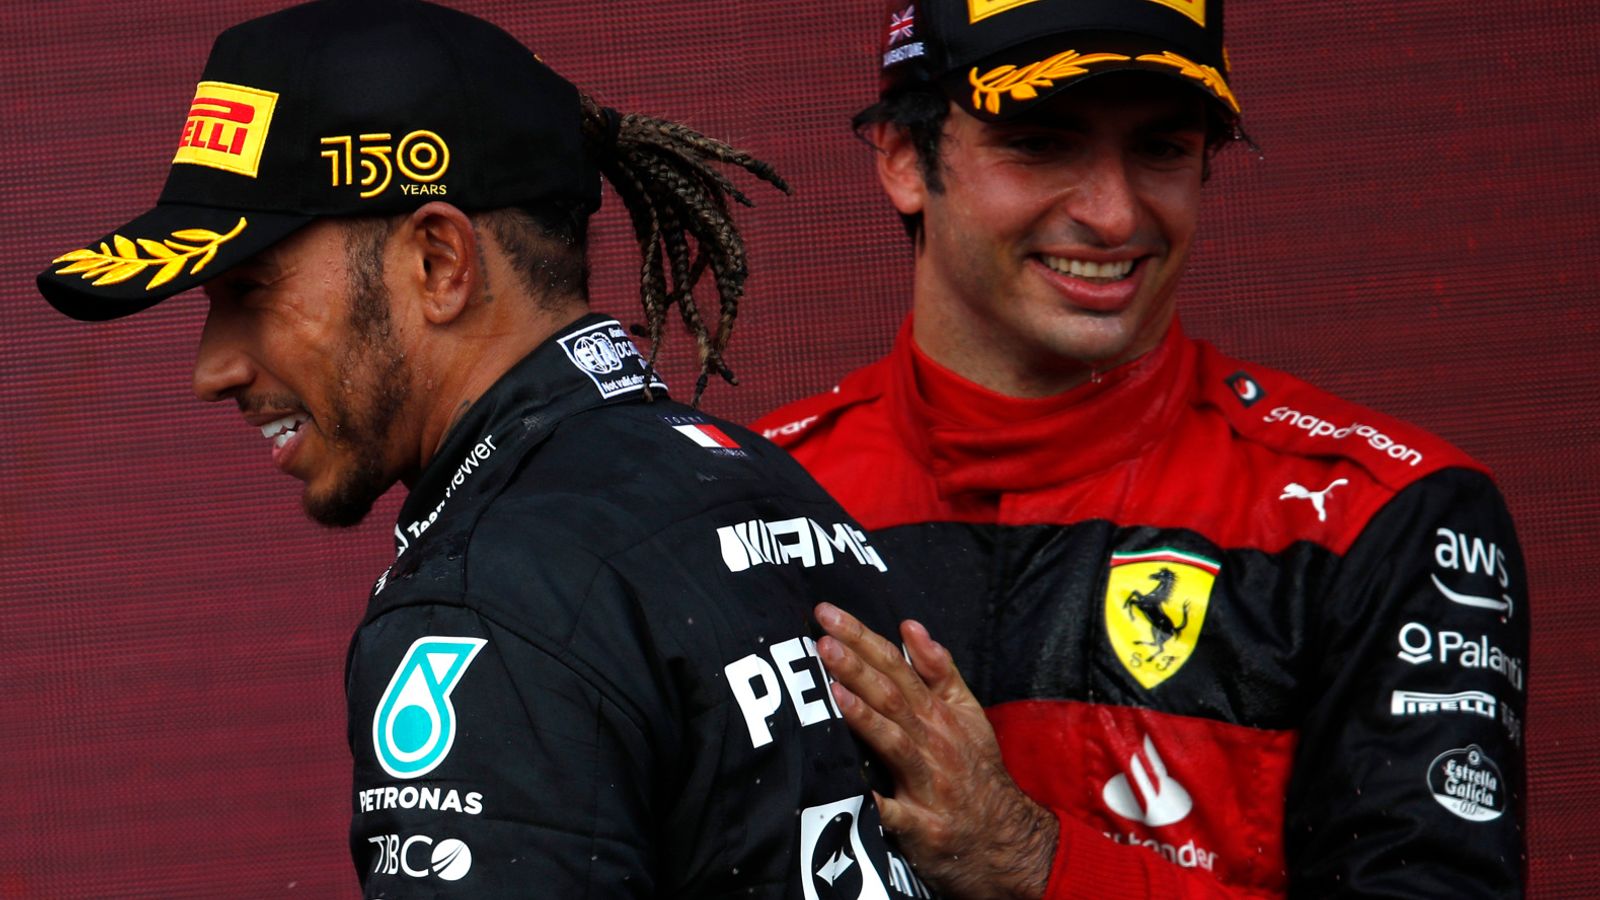 British GP winners and losers: Mixed Ferrari emotions, halo shines, Lewis Hamilton shows Mercedes promise